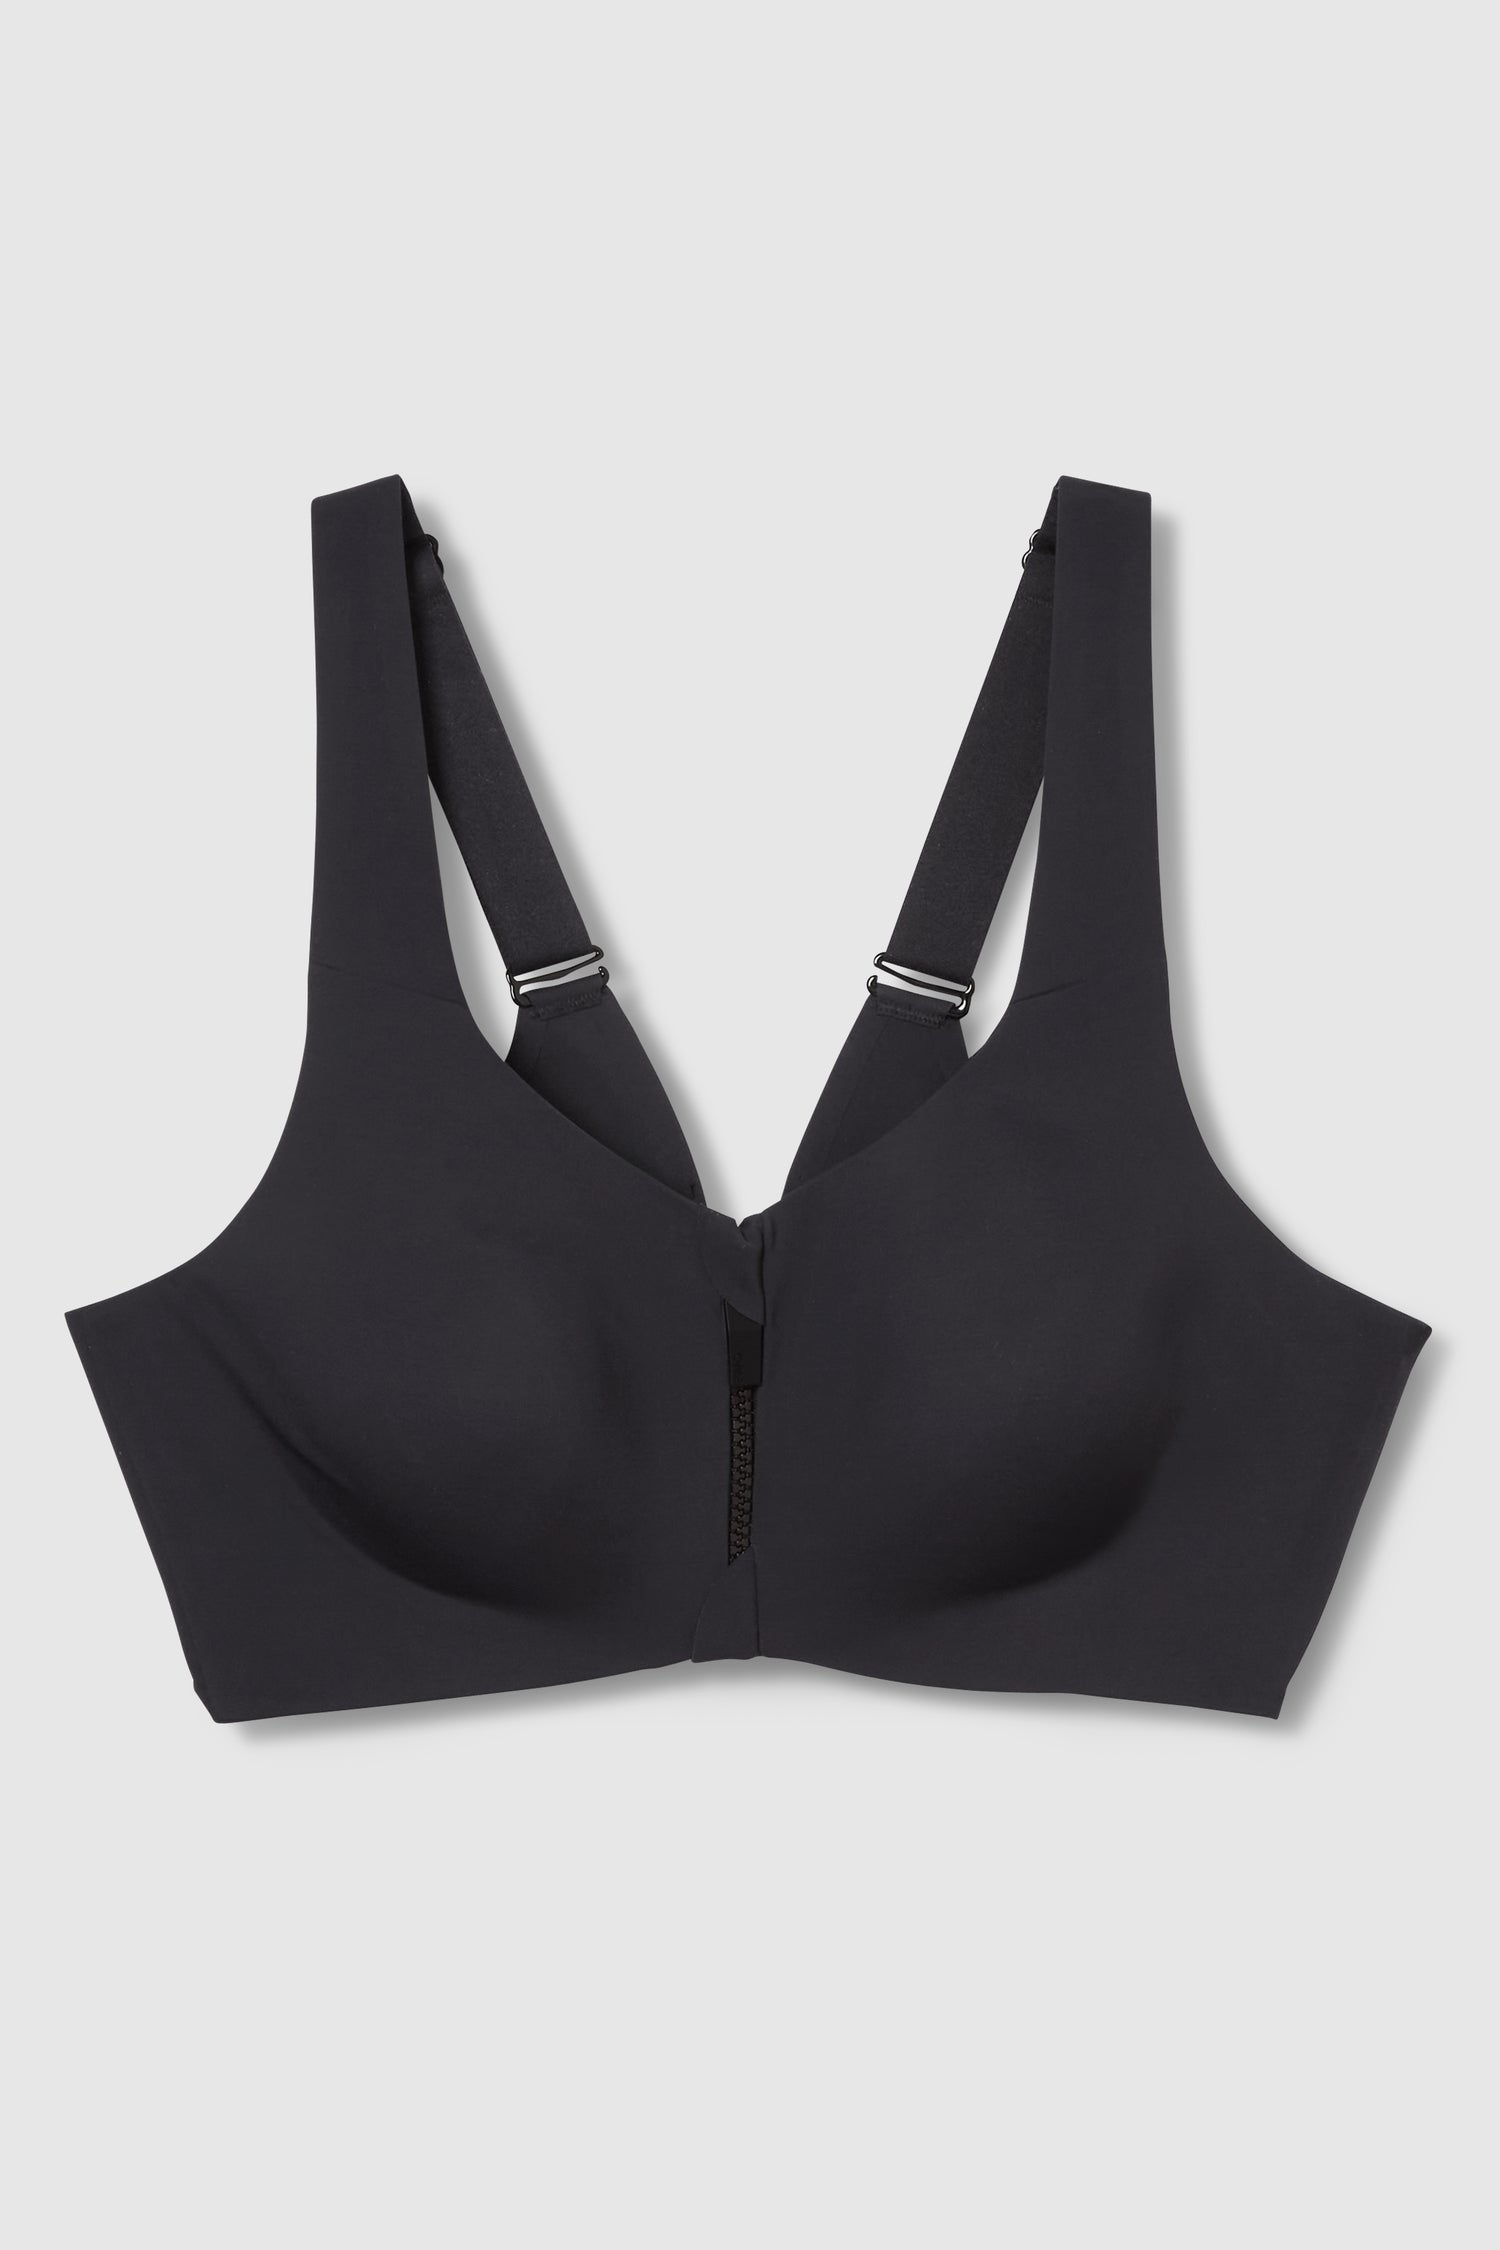 Front Closure Sports Bra Collection